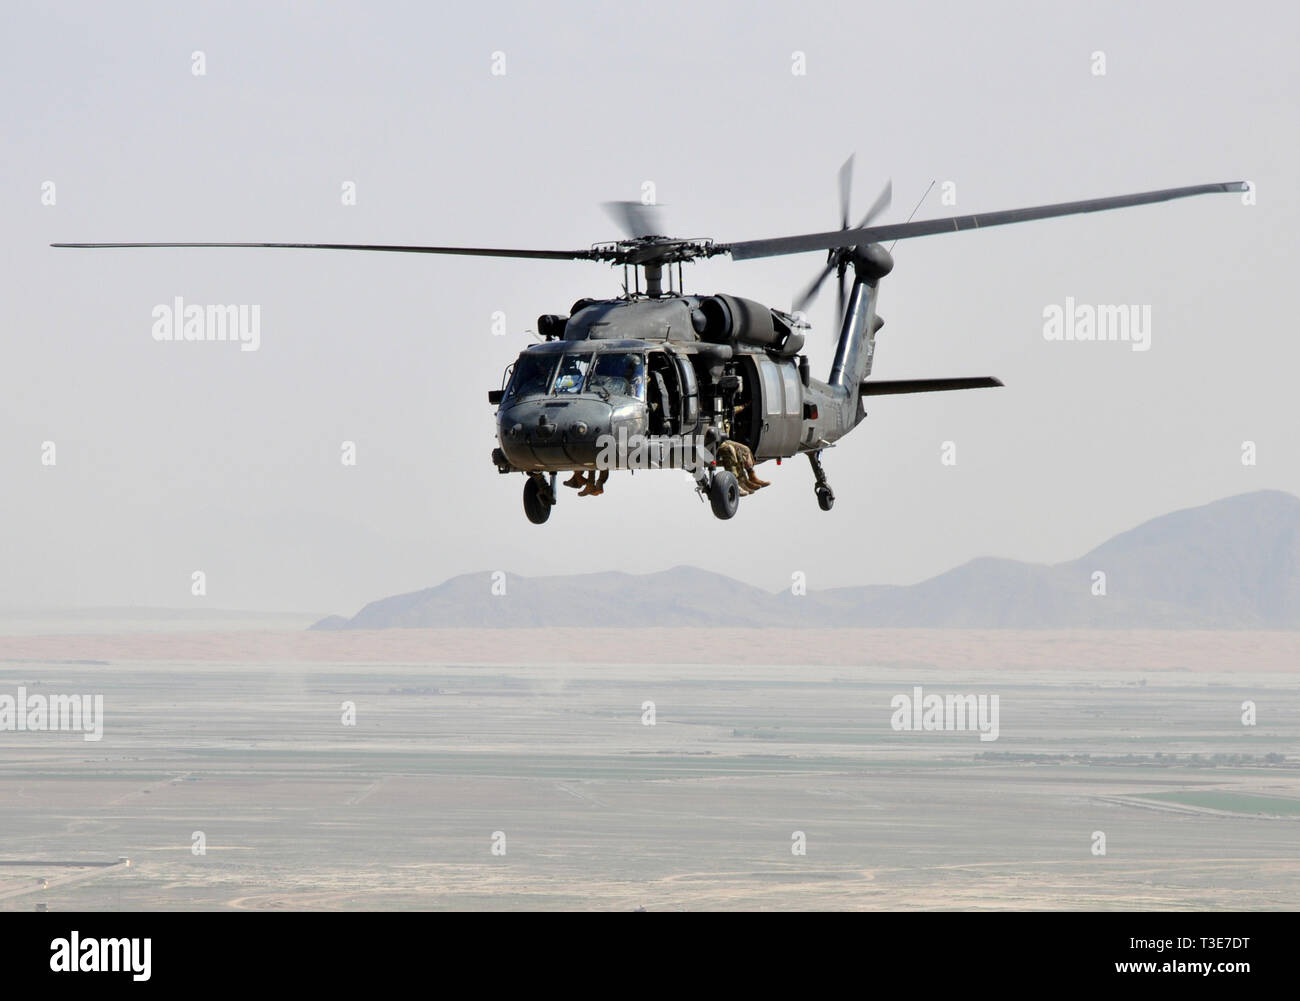 Army National Guardsmen and Air Force pararescuemen from the 64th Expeditionary Rescue Squadron fly in a UH-60 Blackhawk helicopter over Kandahar, Afghanistan, during joint training April 5, 2019. The rescue Airmen and Soldiers work and train together regularly to be prepared to save lives across the region. (U.S. Air Force photo by Capt. Anna-Marie Wyant) Stock Photo